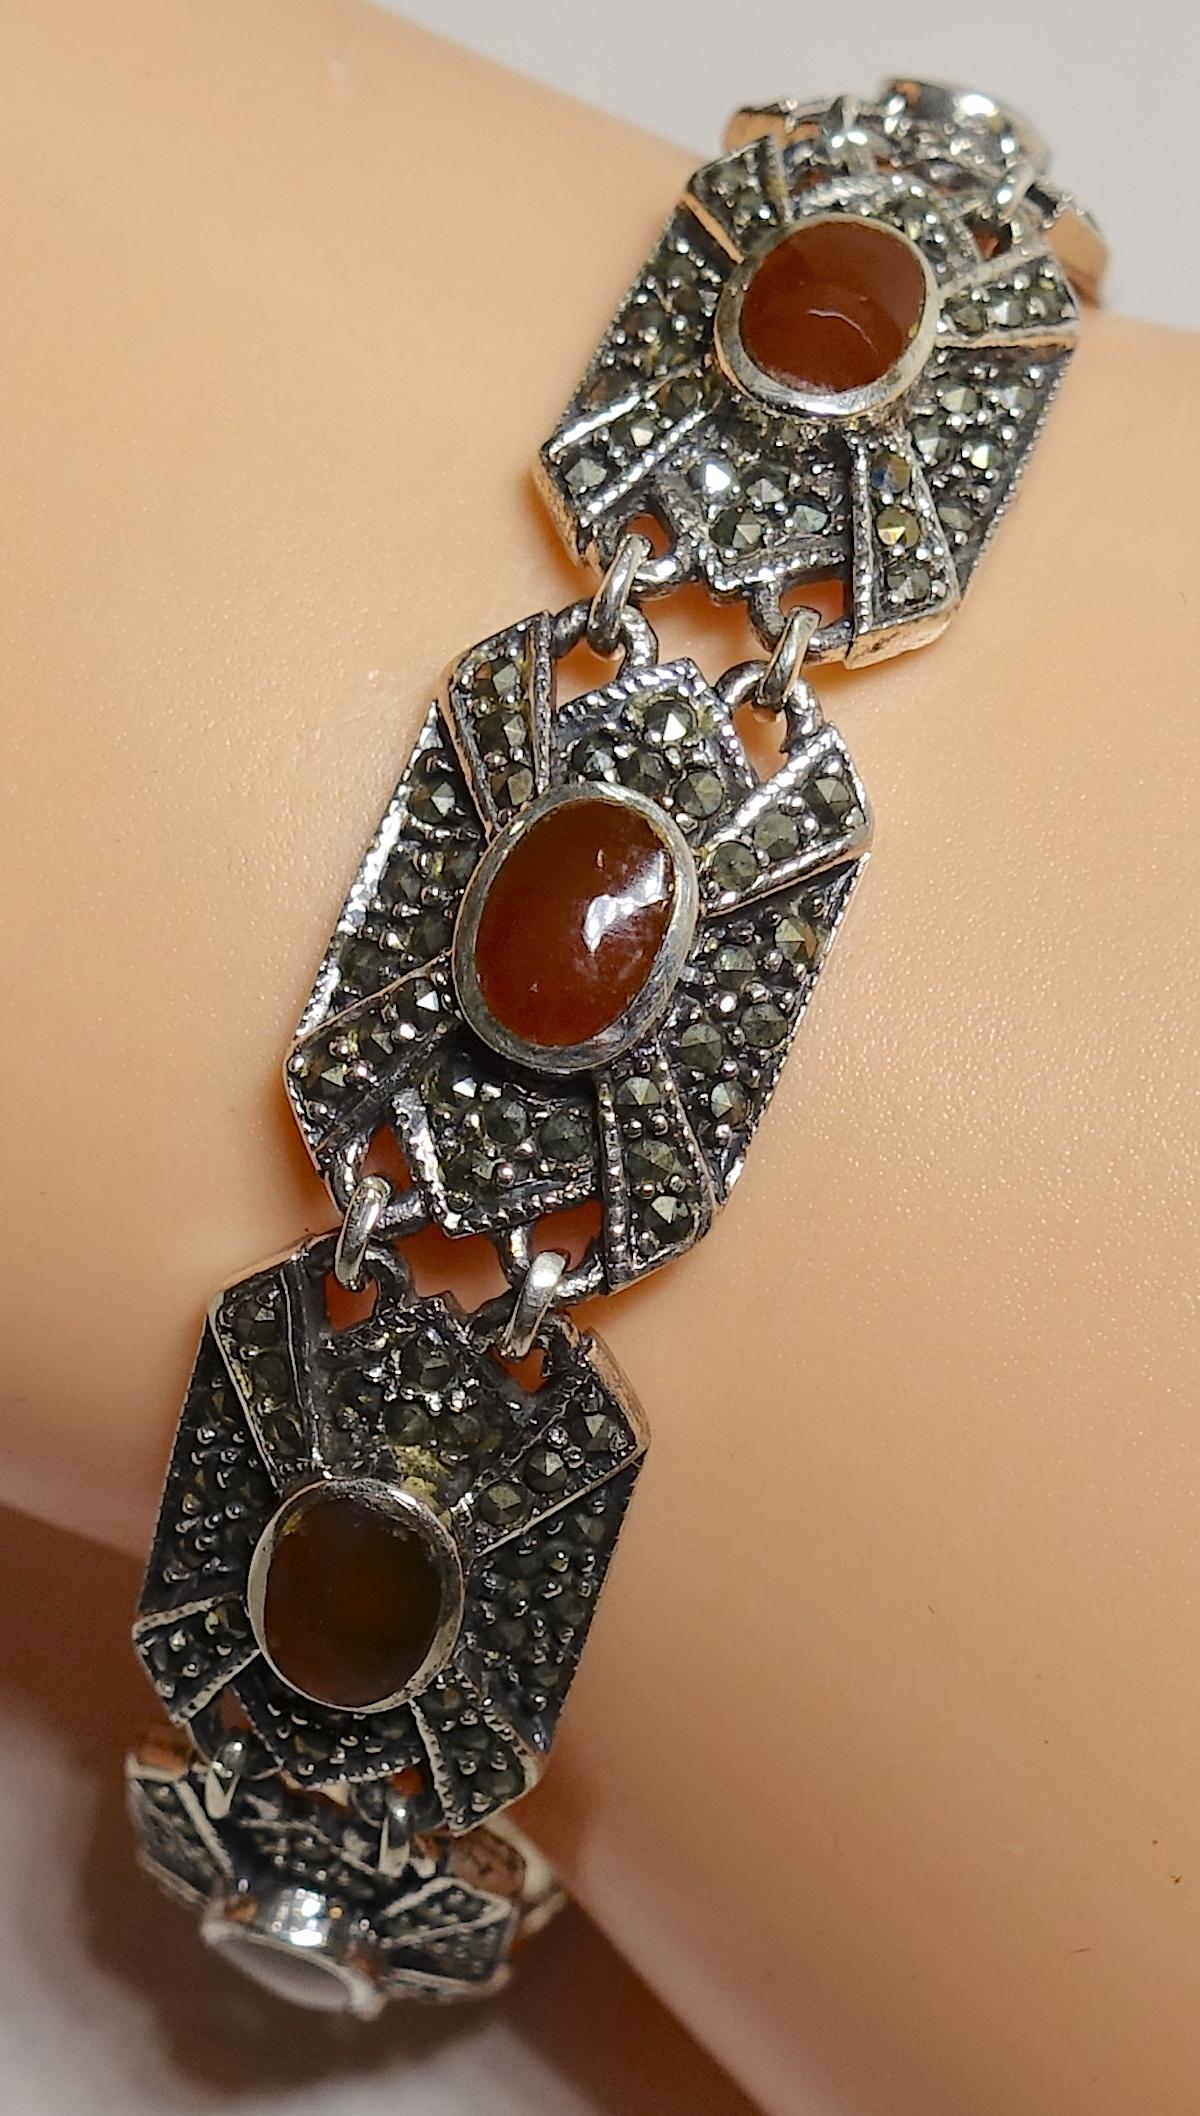 This vintage bracelet has 7 links … each with a carnelian cabochon center surrounded by marcasites … set in sterling silver.   In excellent condition, this bracelet measures 7-1/2” x 1/2” with a fold-over clasp with a safety chain.